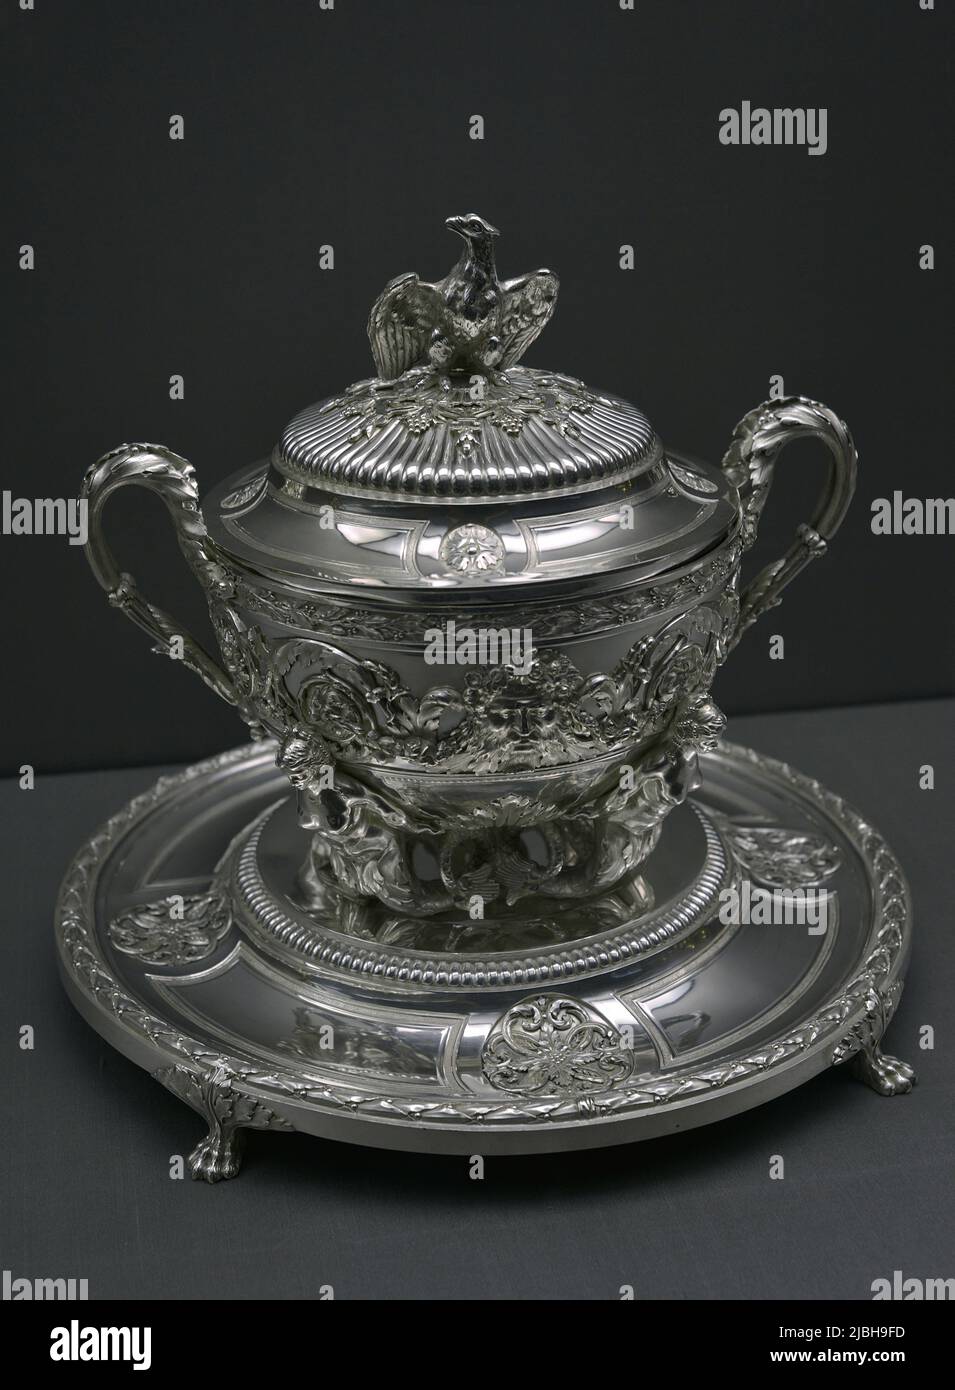 Tureen and stand, ca. 1783-1789. By Jacques-Charles Mongenot (Master in 1775). Silver. France. Calouste Gulbenkian Museum. Lisbon, Portugal. Stock Photo